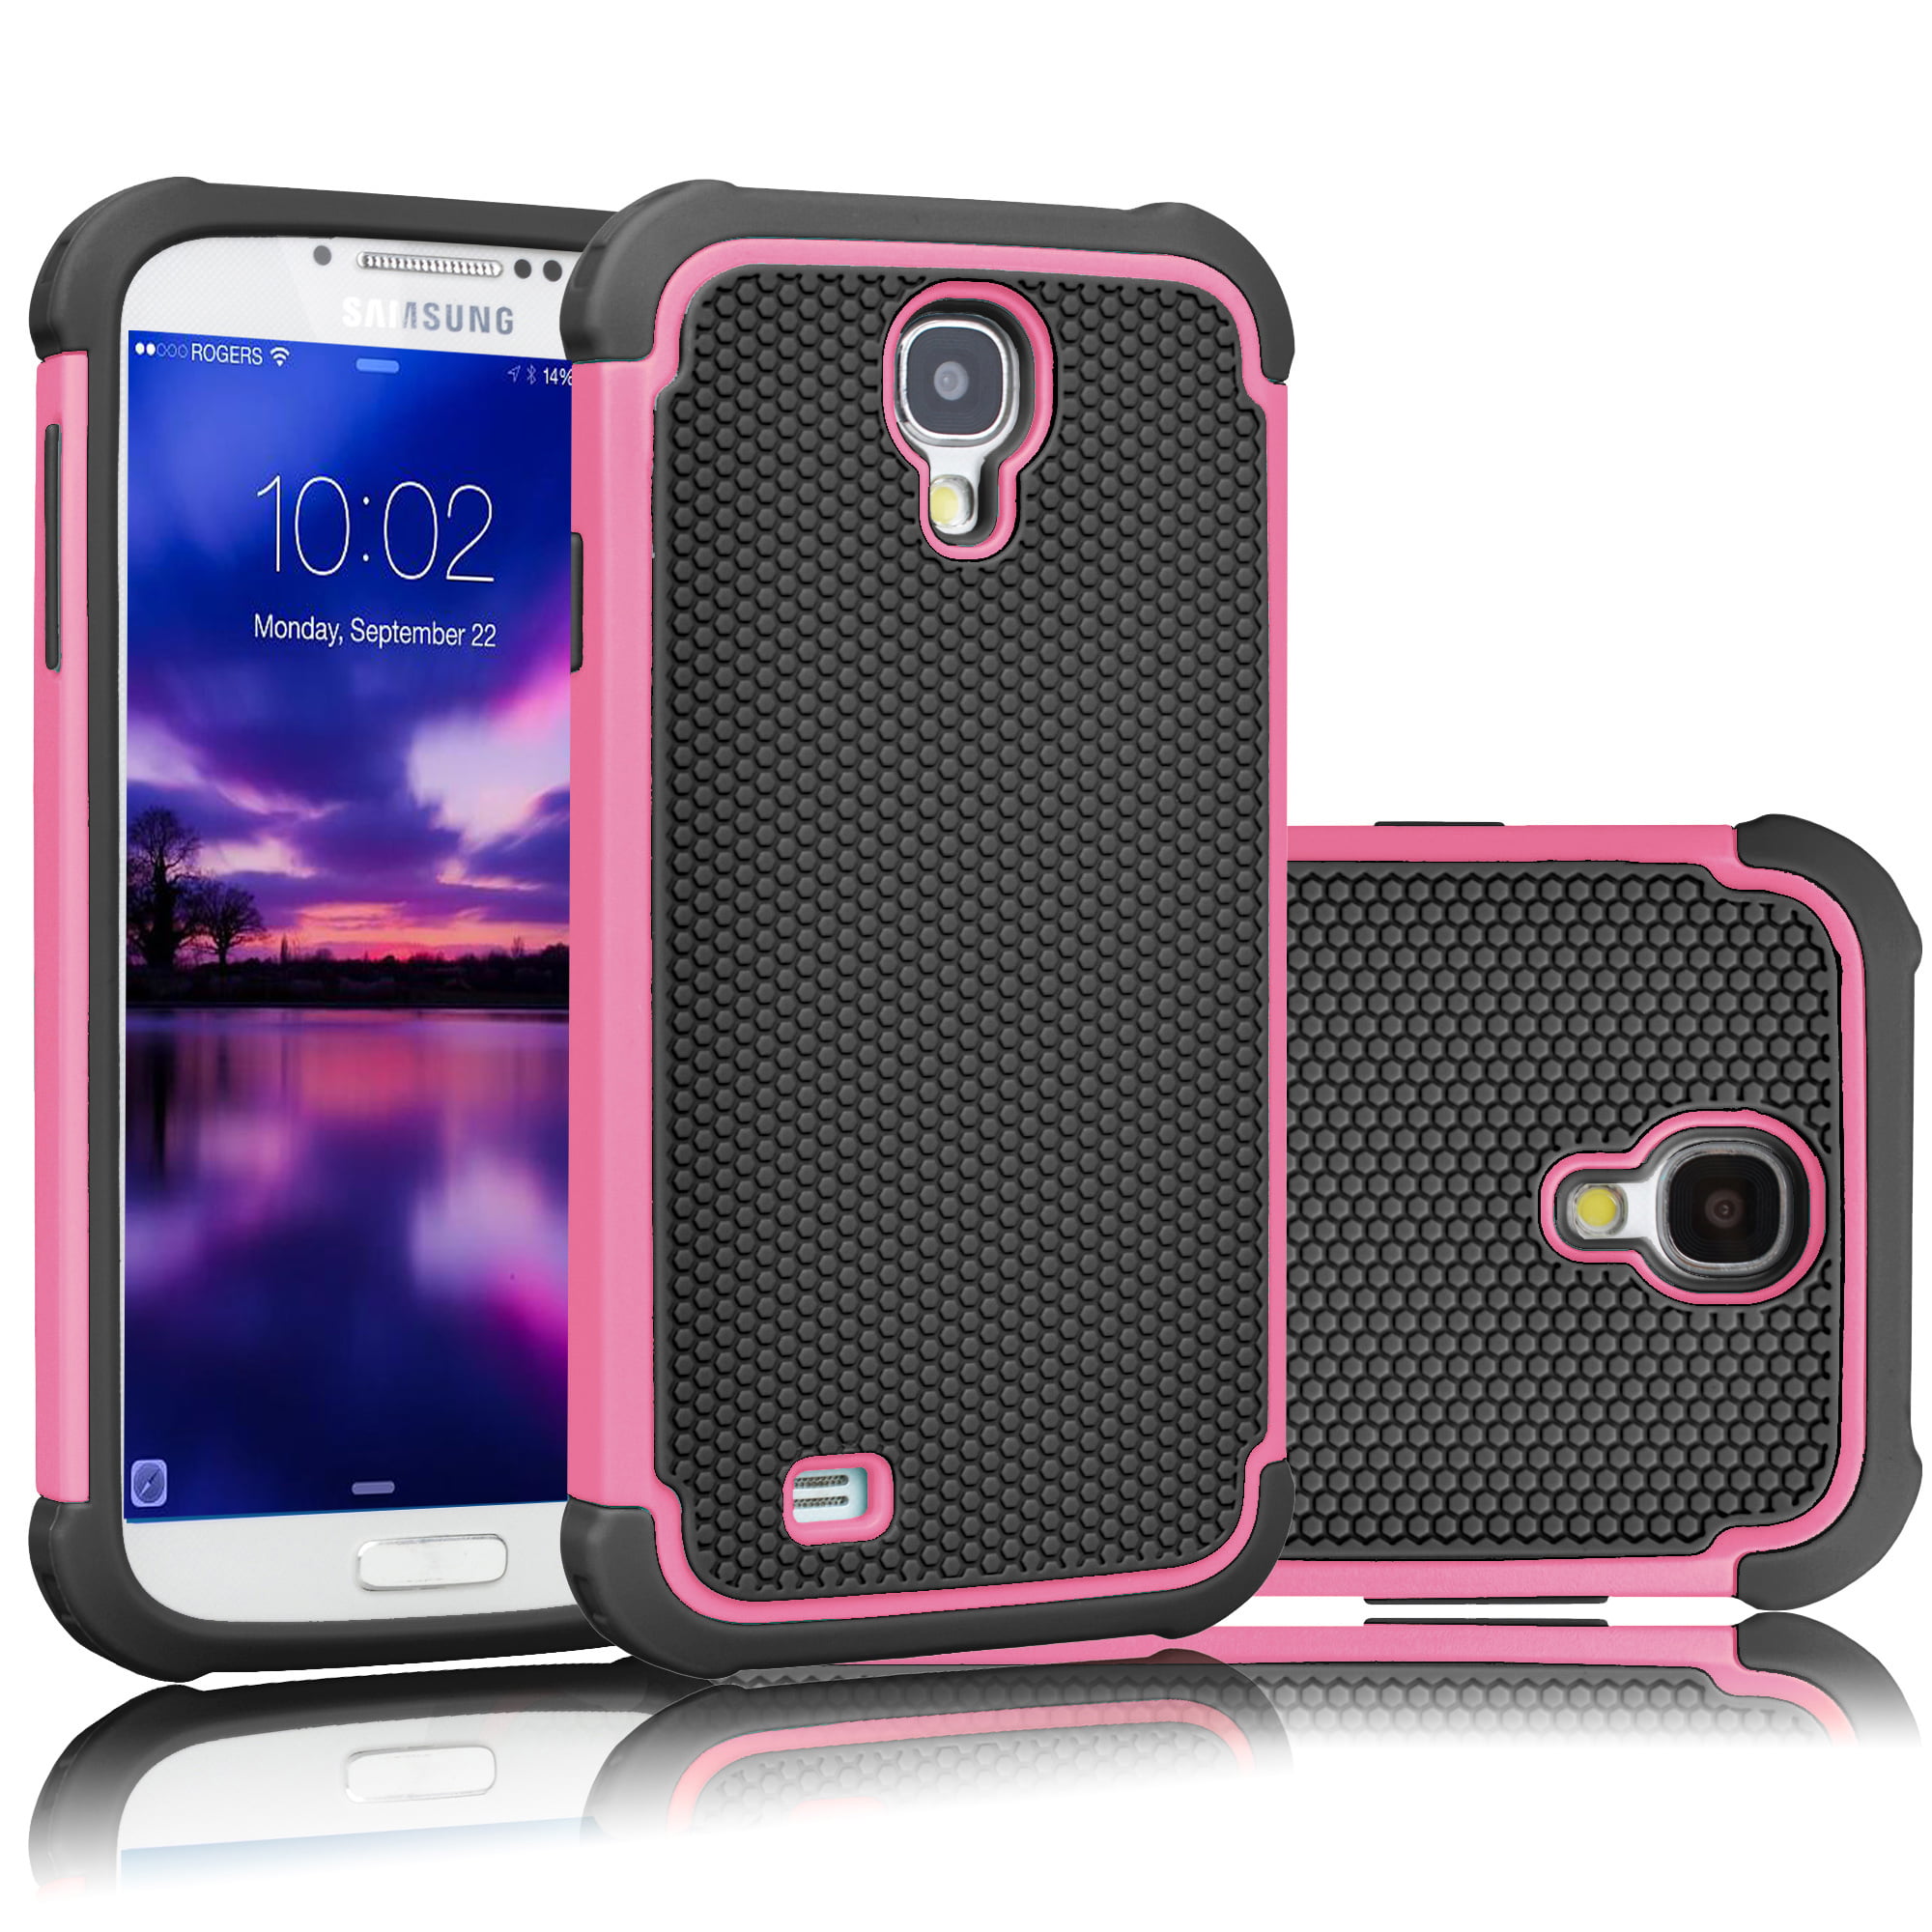 Galaxy S4 Case, Samsung S4 Cover, Tekcoo [Tmajor Series] Shock Absorbing Hybrid Rubber Plastic Impact Defender Rugged Slim Hard Case Cover Shell For Samsung Galaxy S4 S IV I9500 GS4 All Carriers